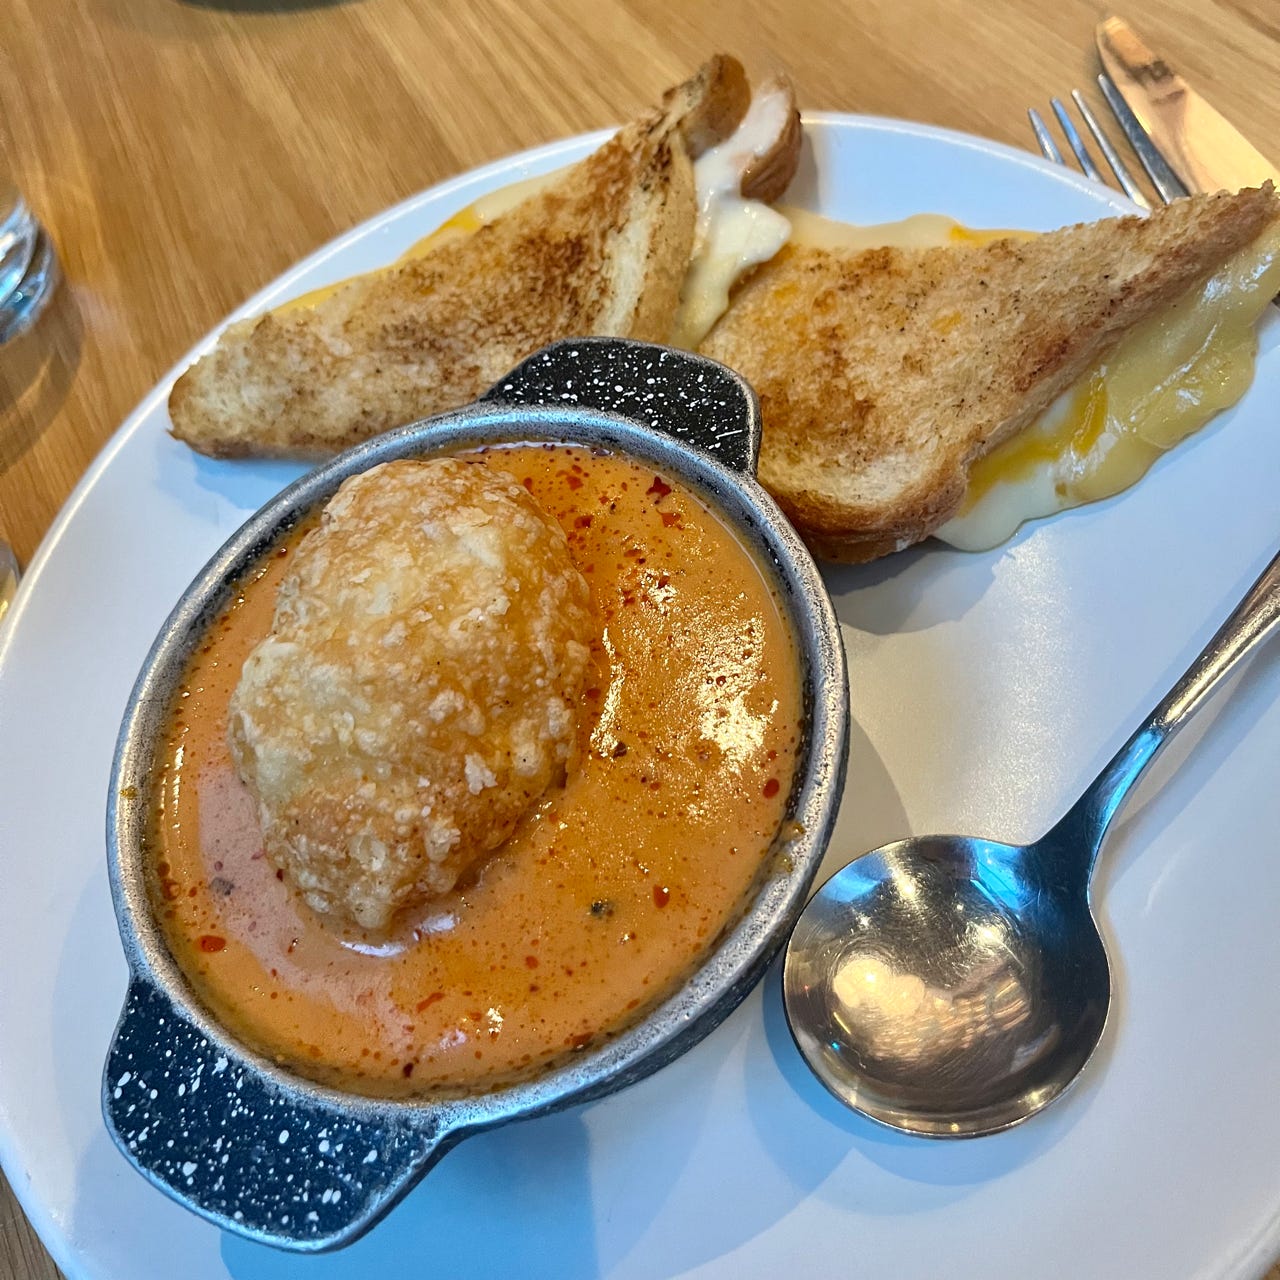 A bowl of orange tomato soup with a bready crouton in the middle. Next to it are two triangular slices of melty grilled cheese and a silver spoon.